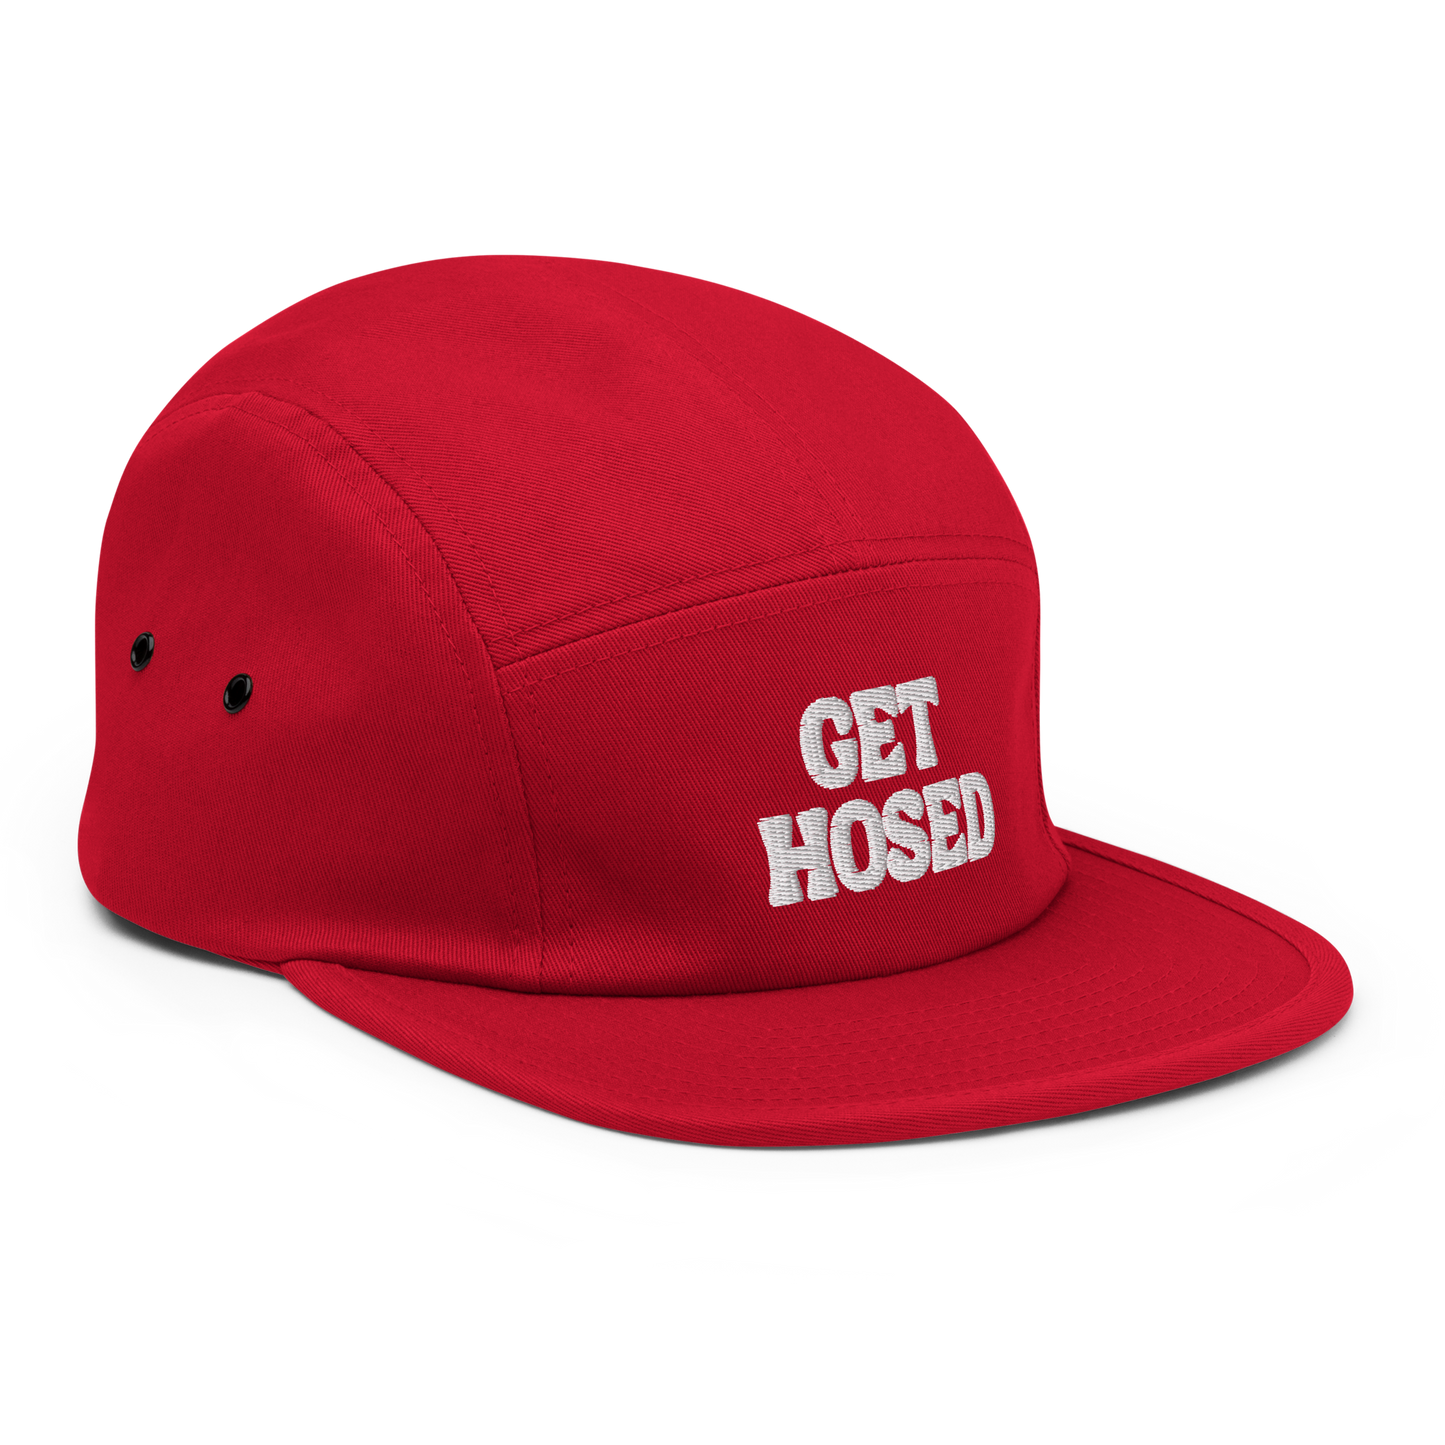 GET HOSED Five Panel Tower Hat